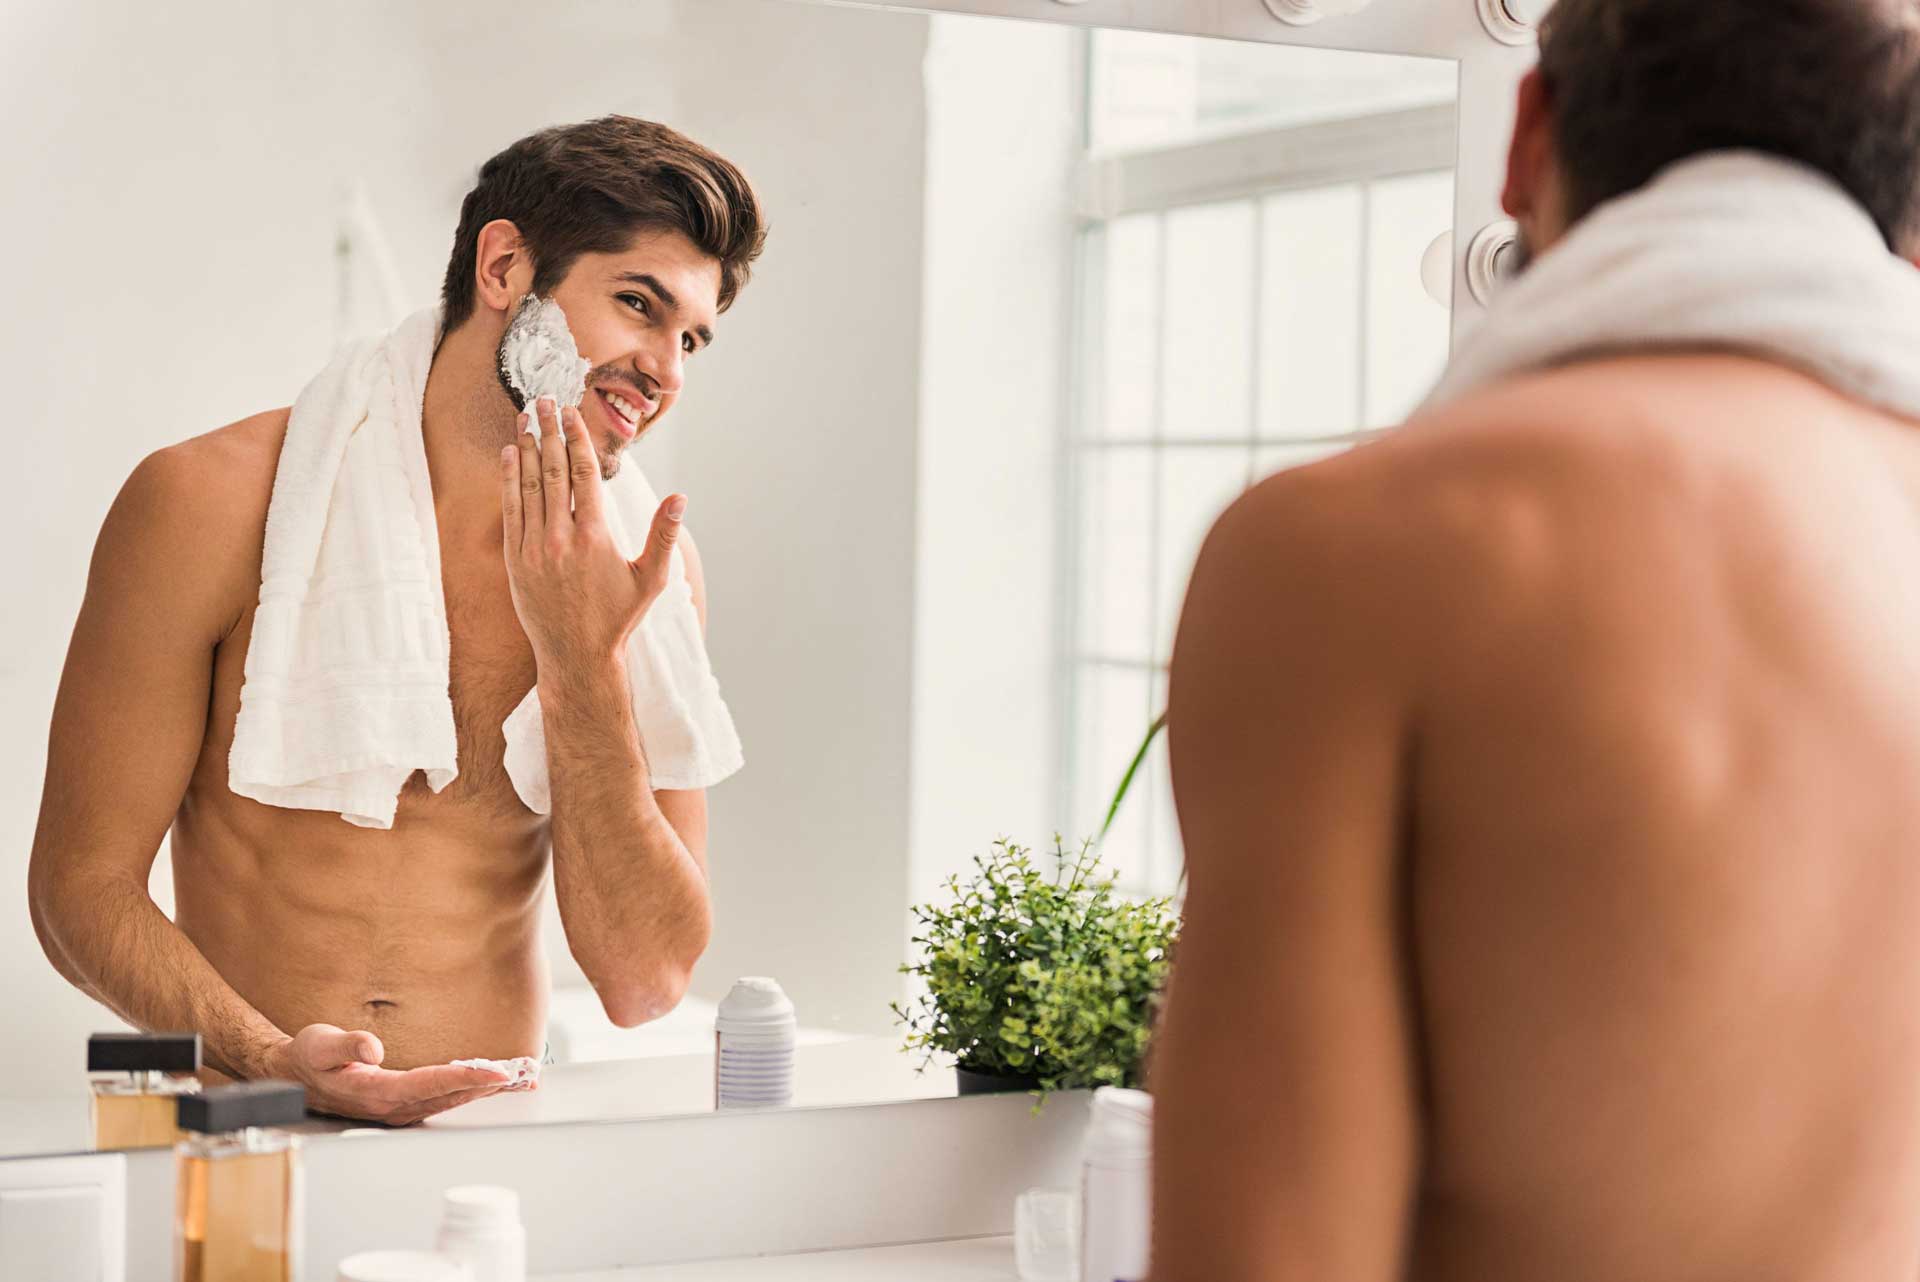 Smooth skin is in – why 43% chose this razor brand.